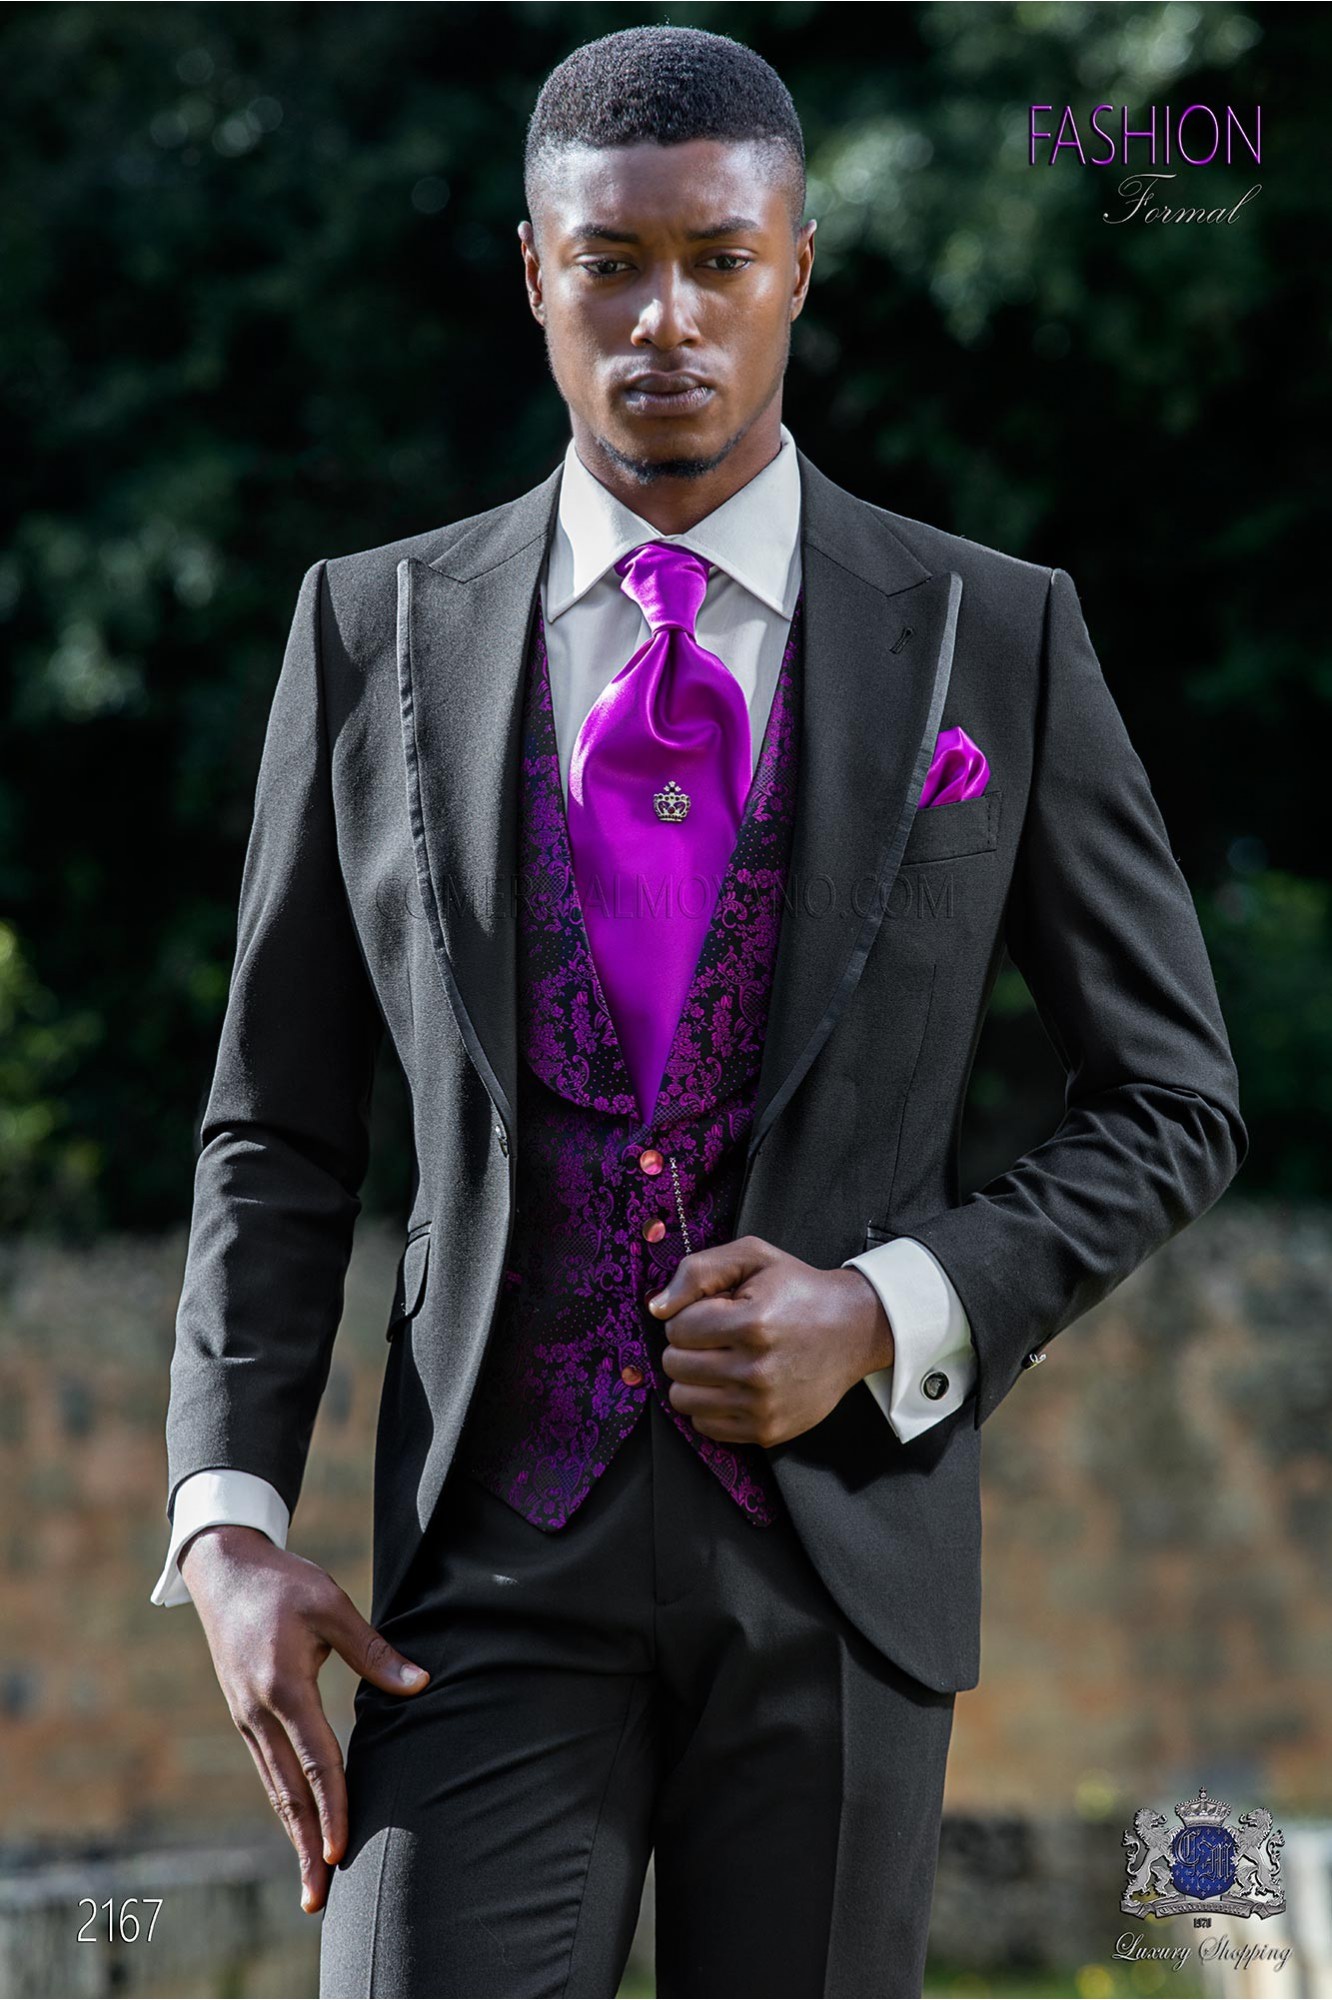 Wedding suit Slim stylish cut. Peak lapel with contrast fabric piping. Made from wool and acetate fabric in black.